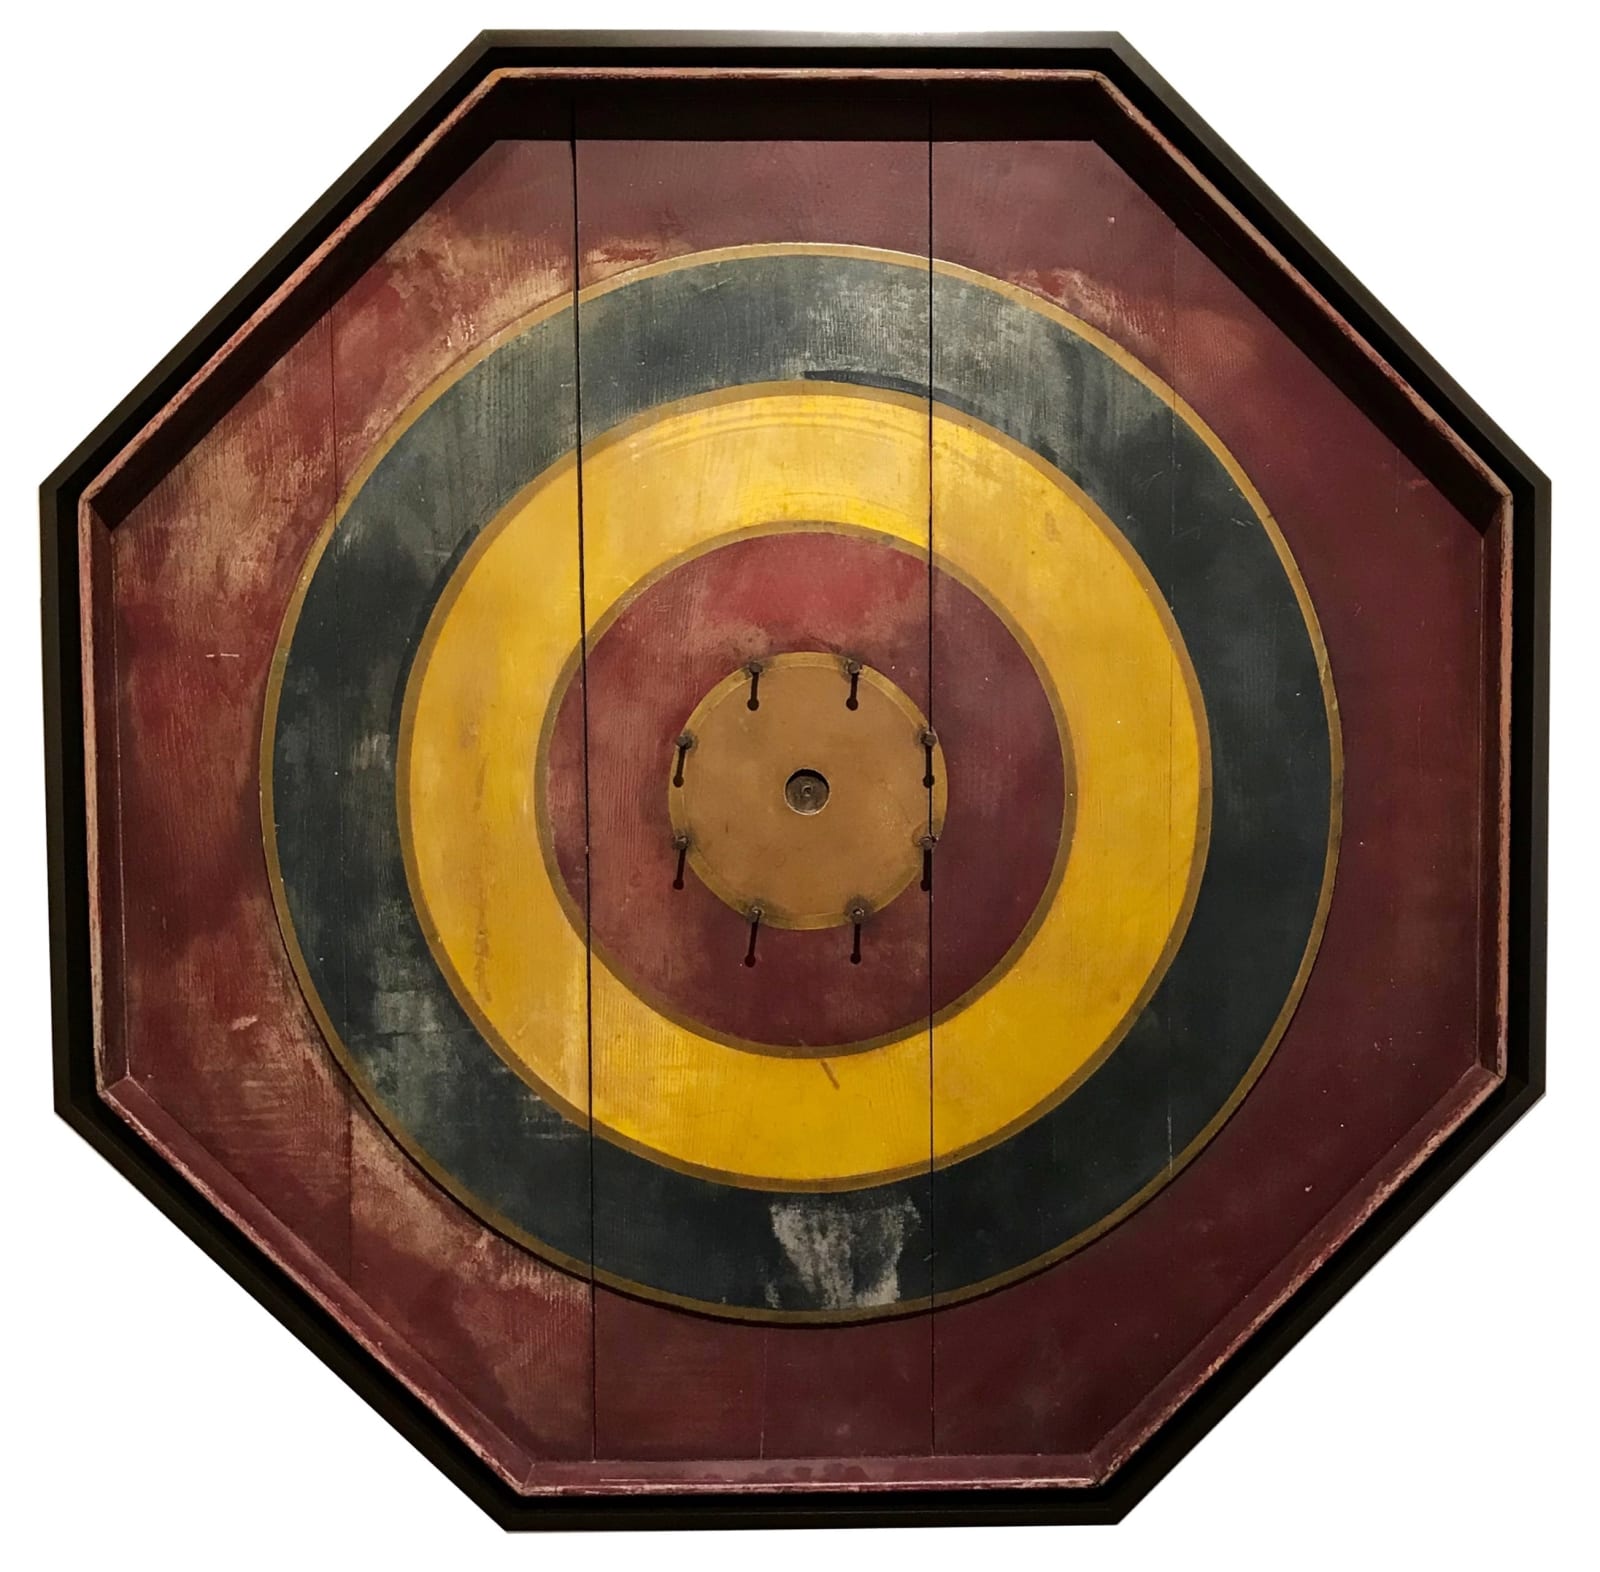 Artist Unknown Bulls Eye Target Octagonal Game Board, Midwest, ca. 1910-20 Painted wood with original surface 49 x 49 x 4 in. (124.5 x 124.5 x 10.2 cm.)